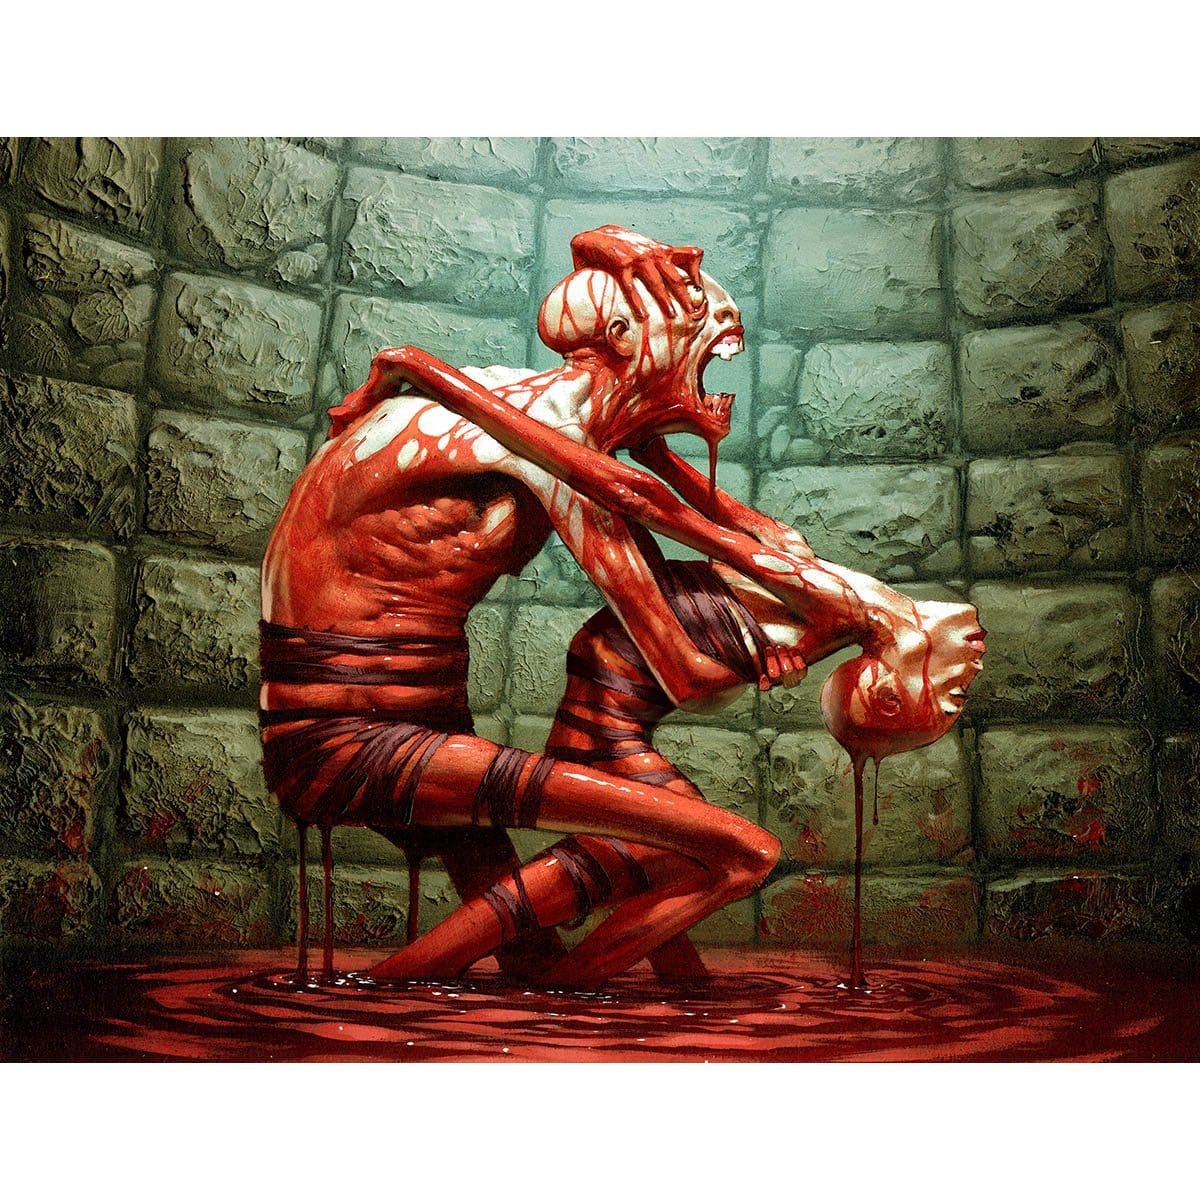 Macabre Waltz Print - Print - Original Magic Art - Accessories for Magic the Gathering and other card games